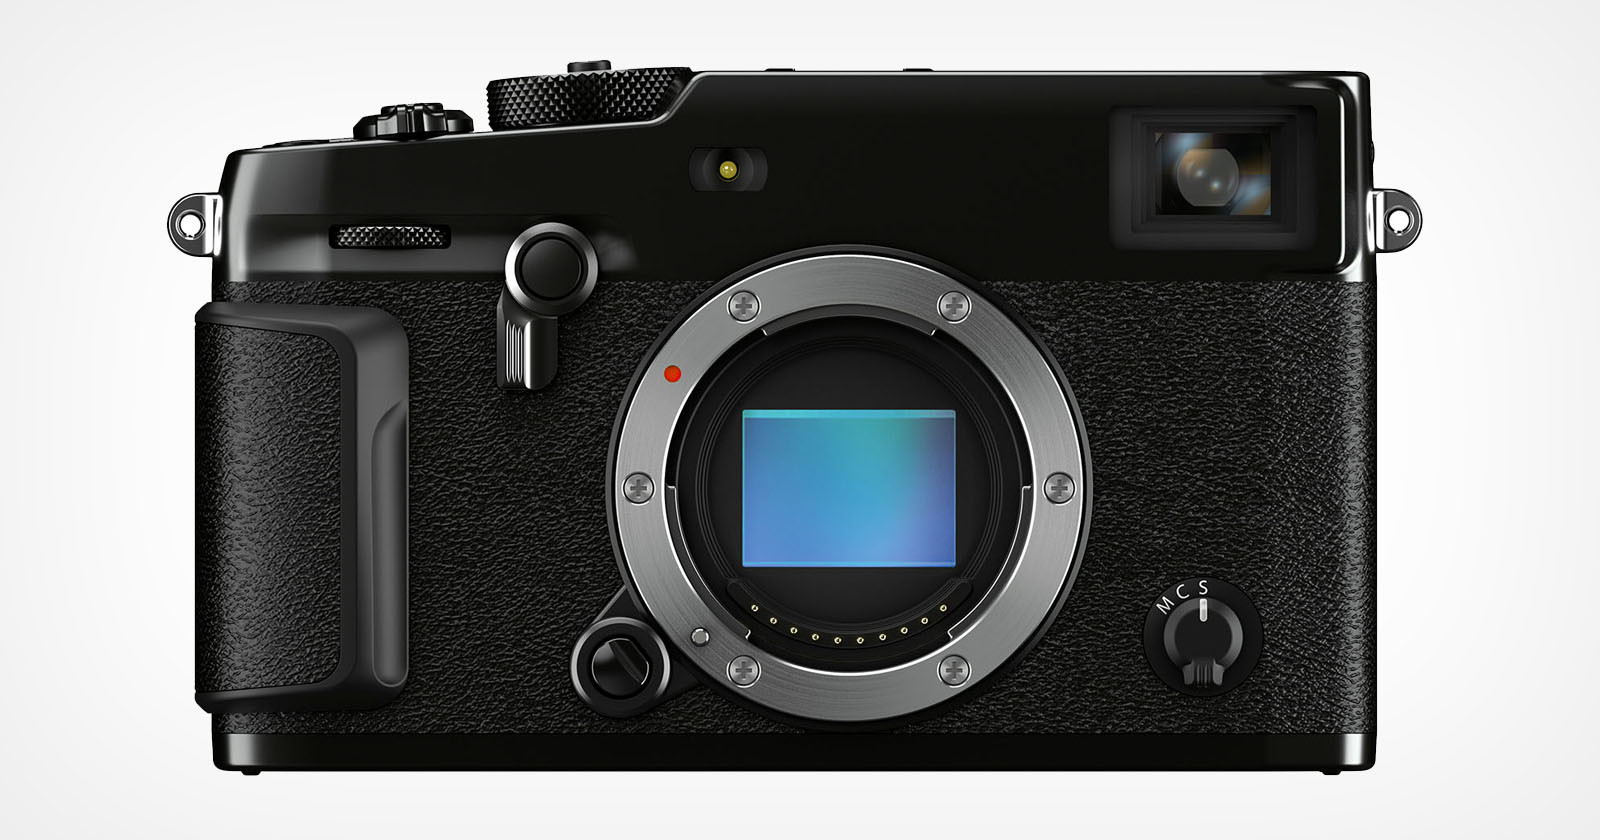 Fujifilm Sued for Falsely Advertising X-Pro3 as Having ‘Reliable Durability’